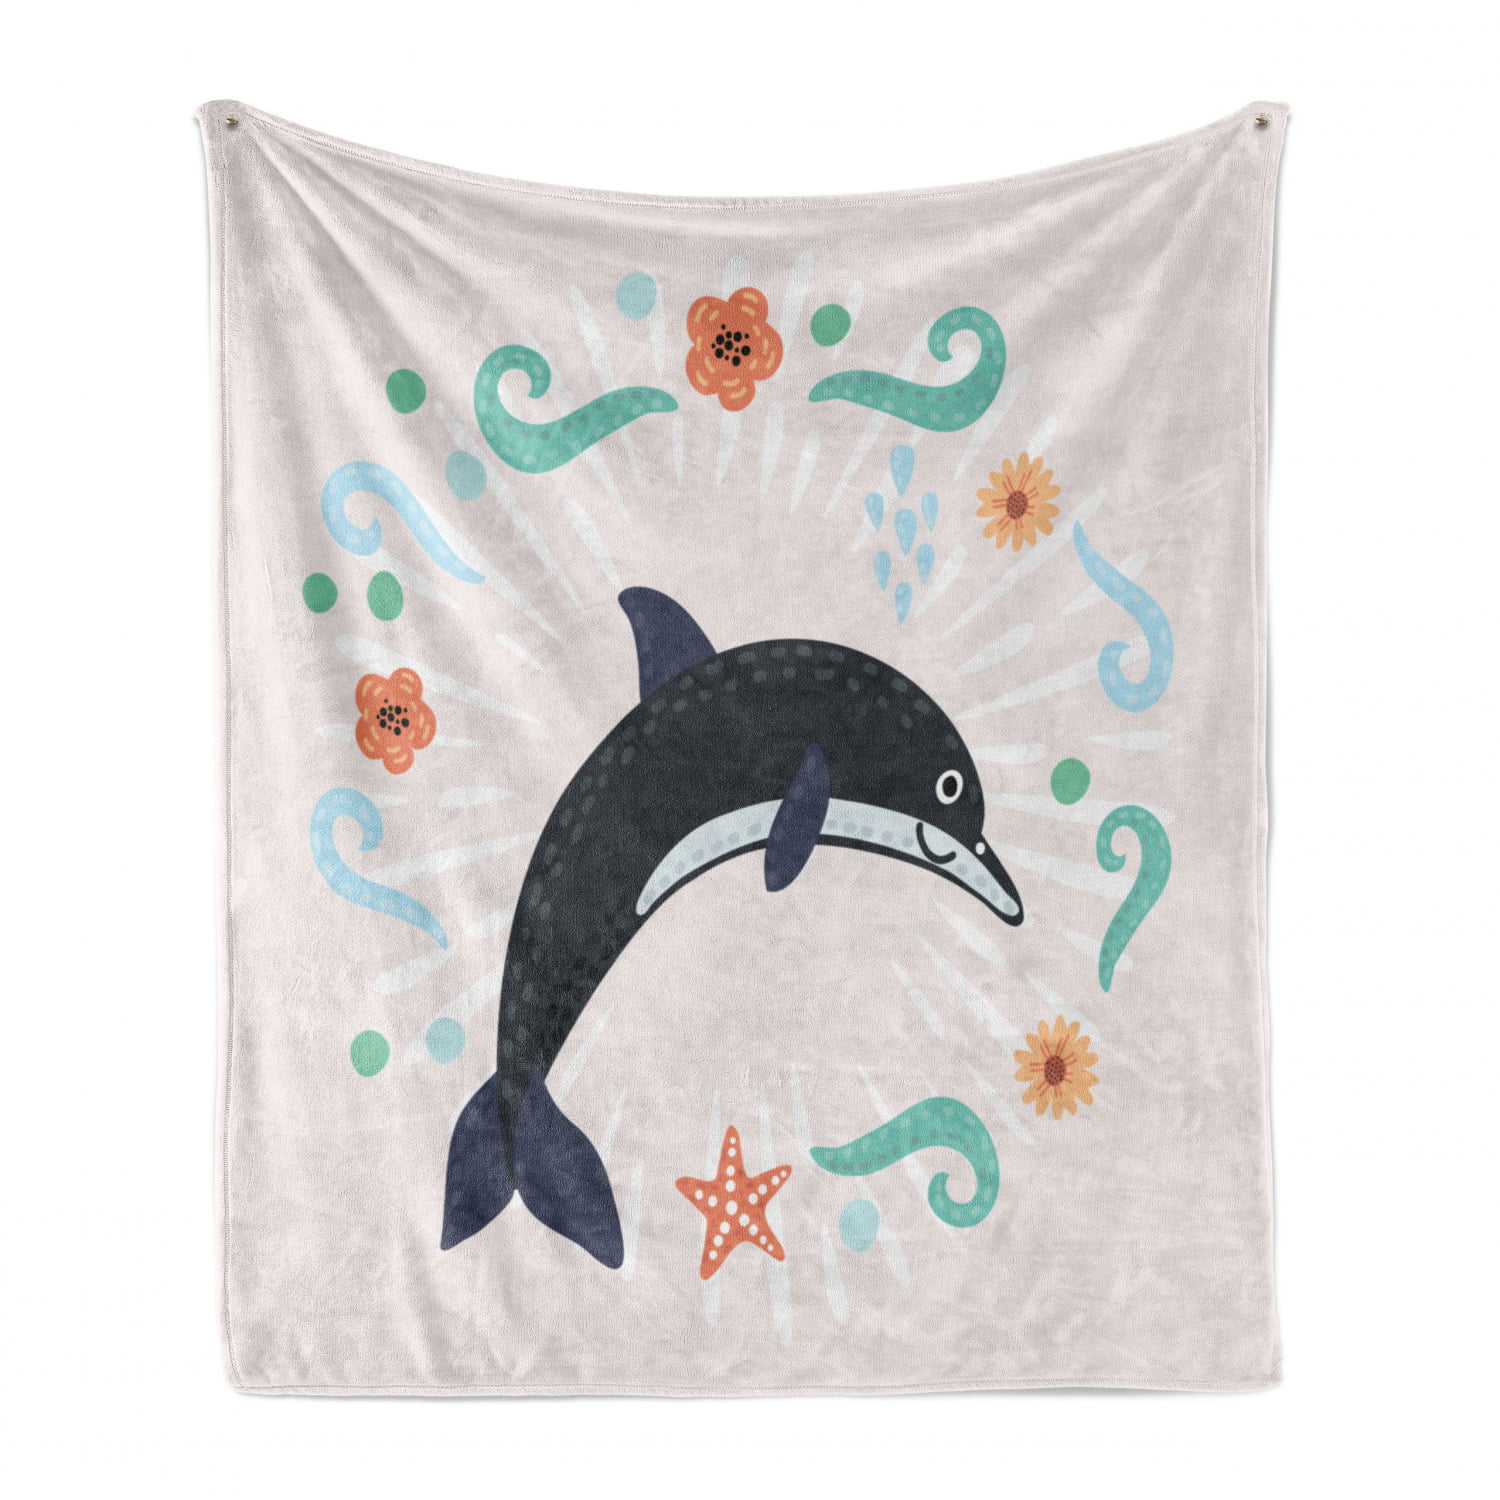 70 x 90 Cartoon Composition of Smiling Nautical Ocean Animal with Starburst Line and Swirls Multicolor Cozy Plush for Indoor and Outdoor Use Ambesonne Dolphin Soft Flannel Fleece Throw Blanket 